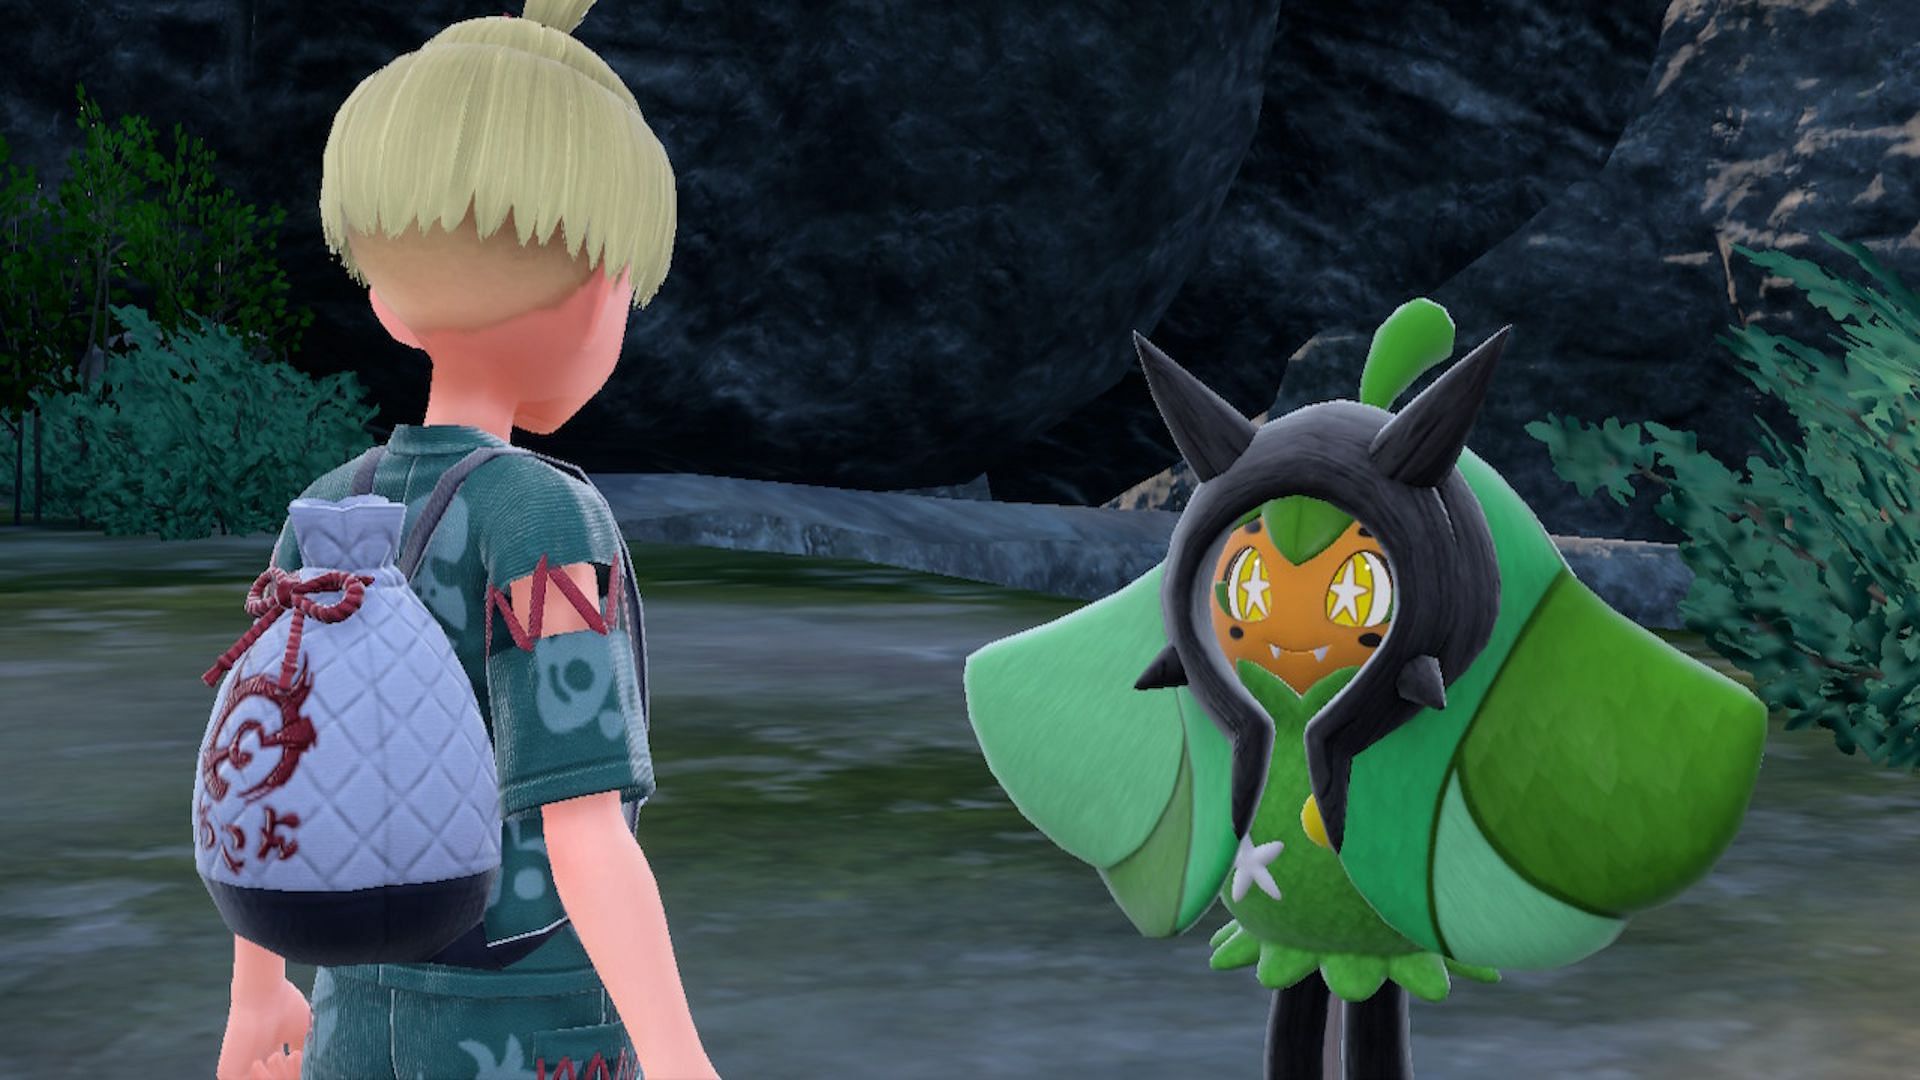 Pokemon Scarlet and Violet's Teal Mask DLC is the Place to Let